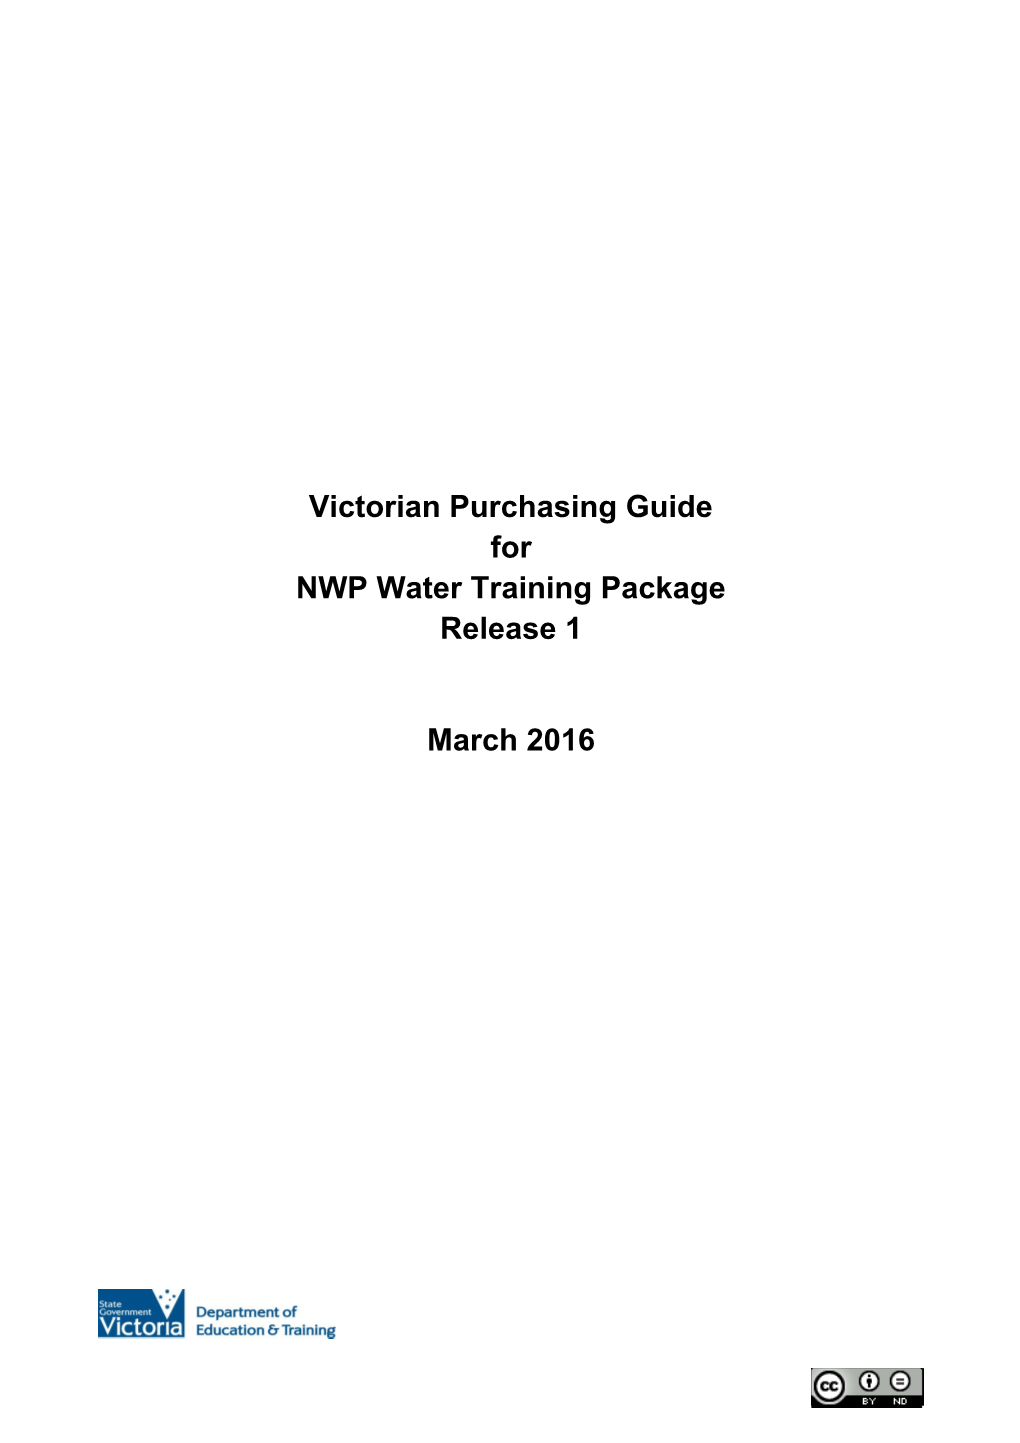 Victorian Purchasing Guide for NWP Water